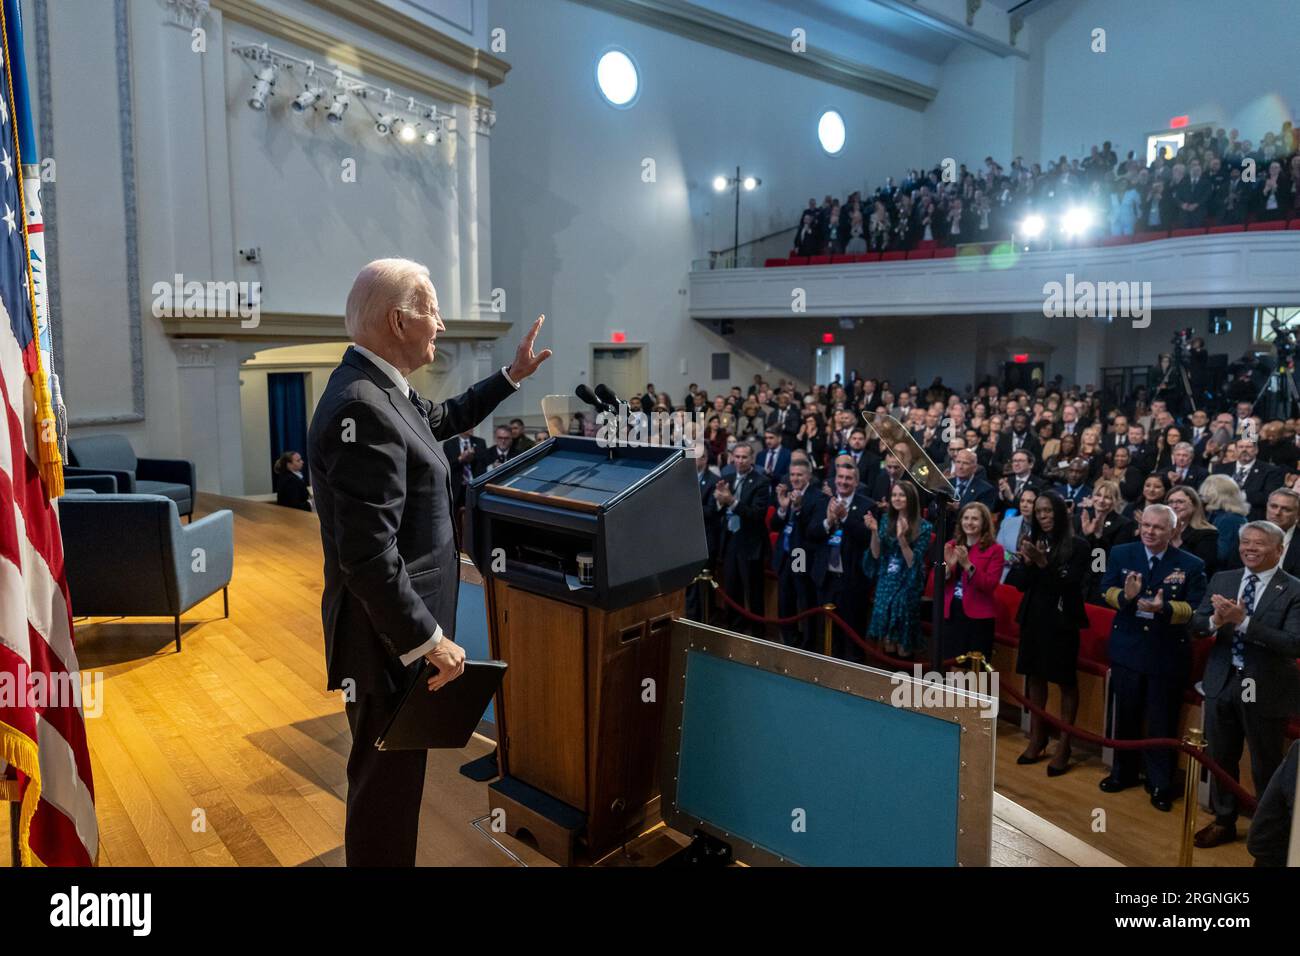 Reportage:  20th anniversary of the Department of Homeland Security Event (2023) - President Joe Biden delivers remarks at an event commemorating the 20th anniversary of the Department of Homeland Security, Wednesday, March 1, 2023, at the DHS St. Elizabeth’s Campus in Washington, D.C. Stock Photo